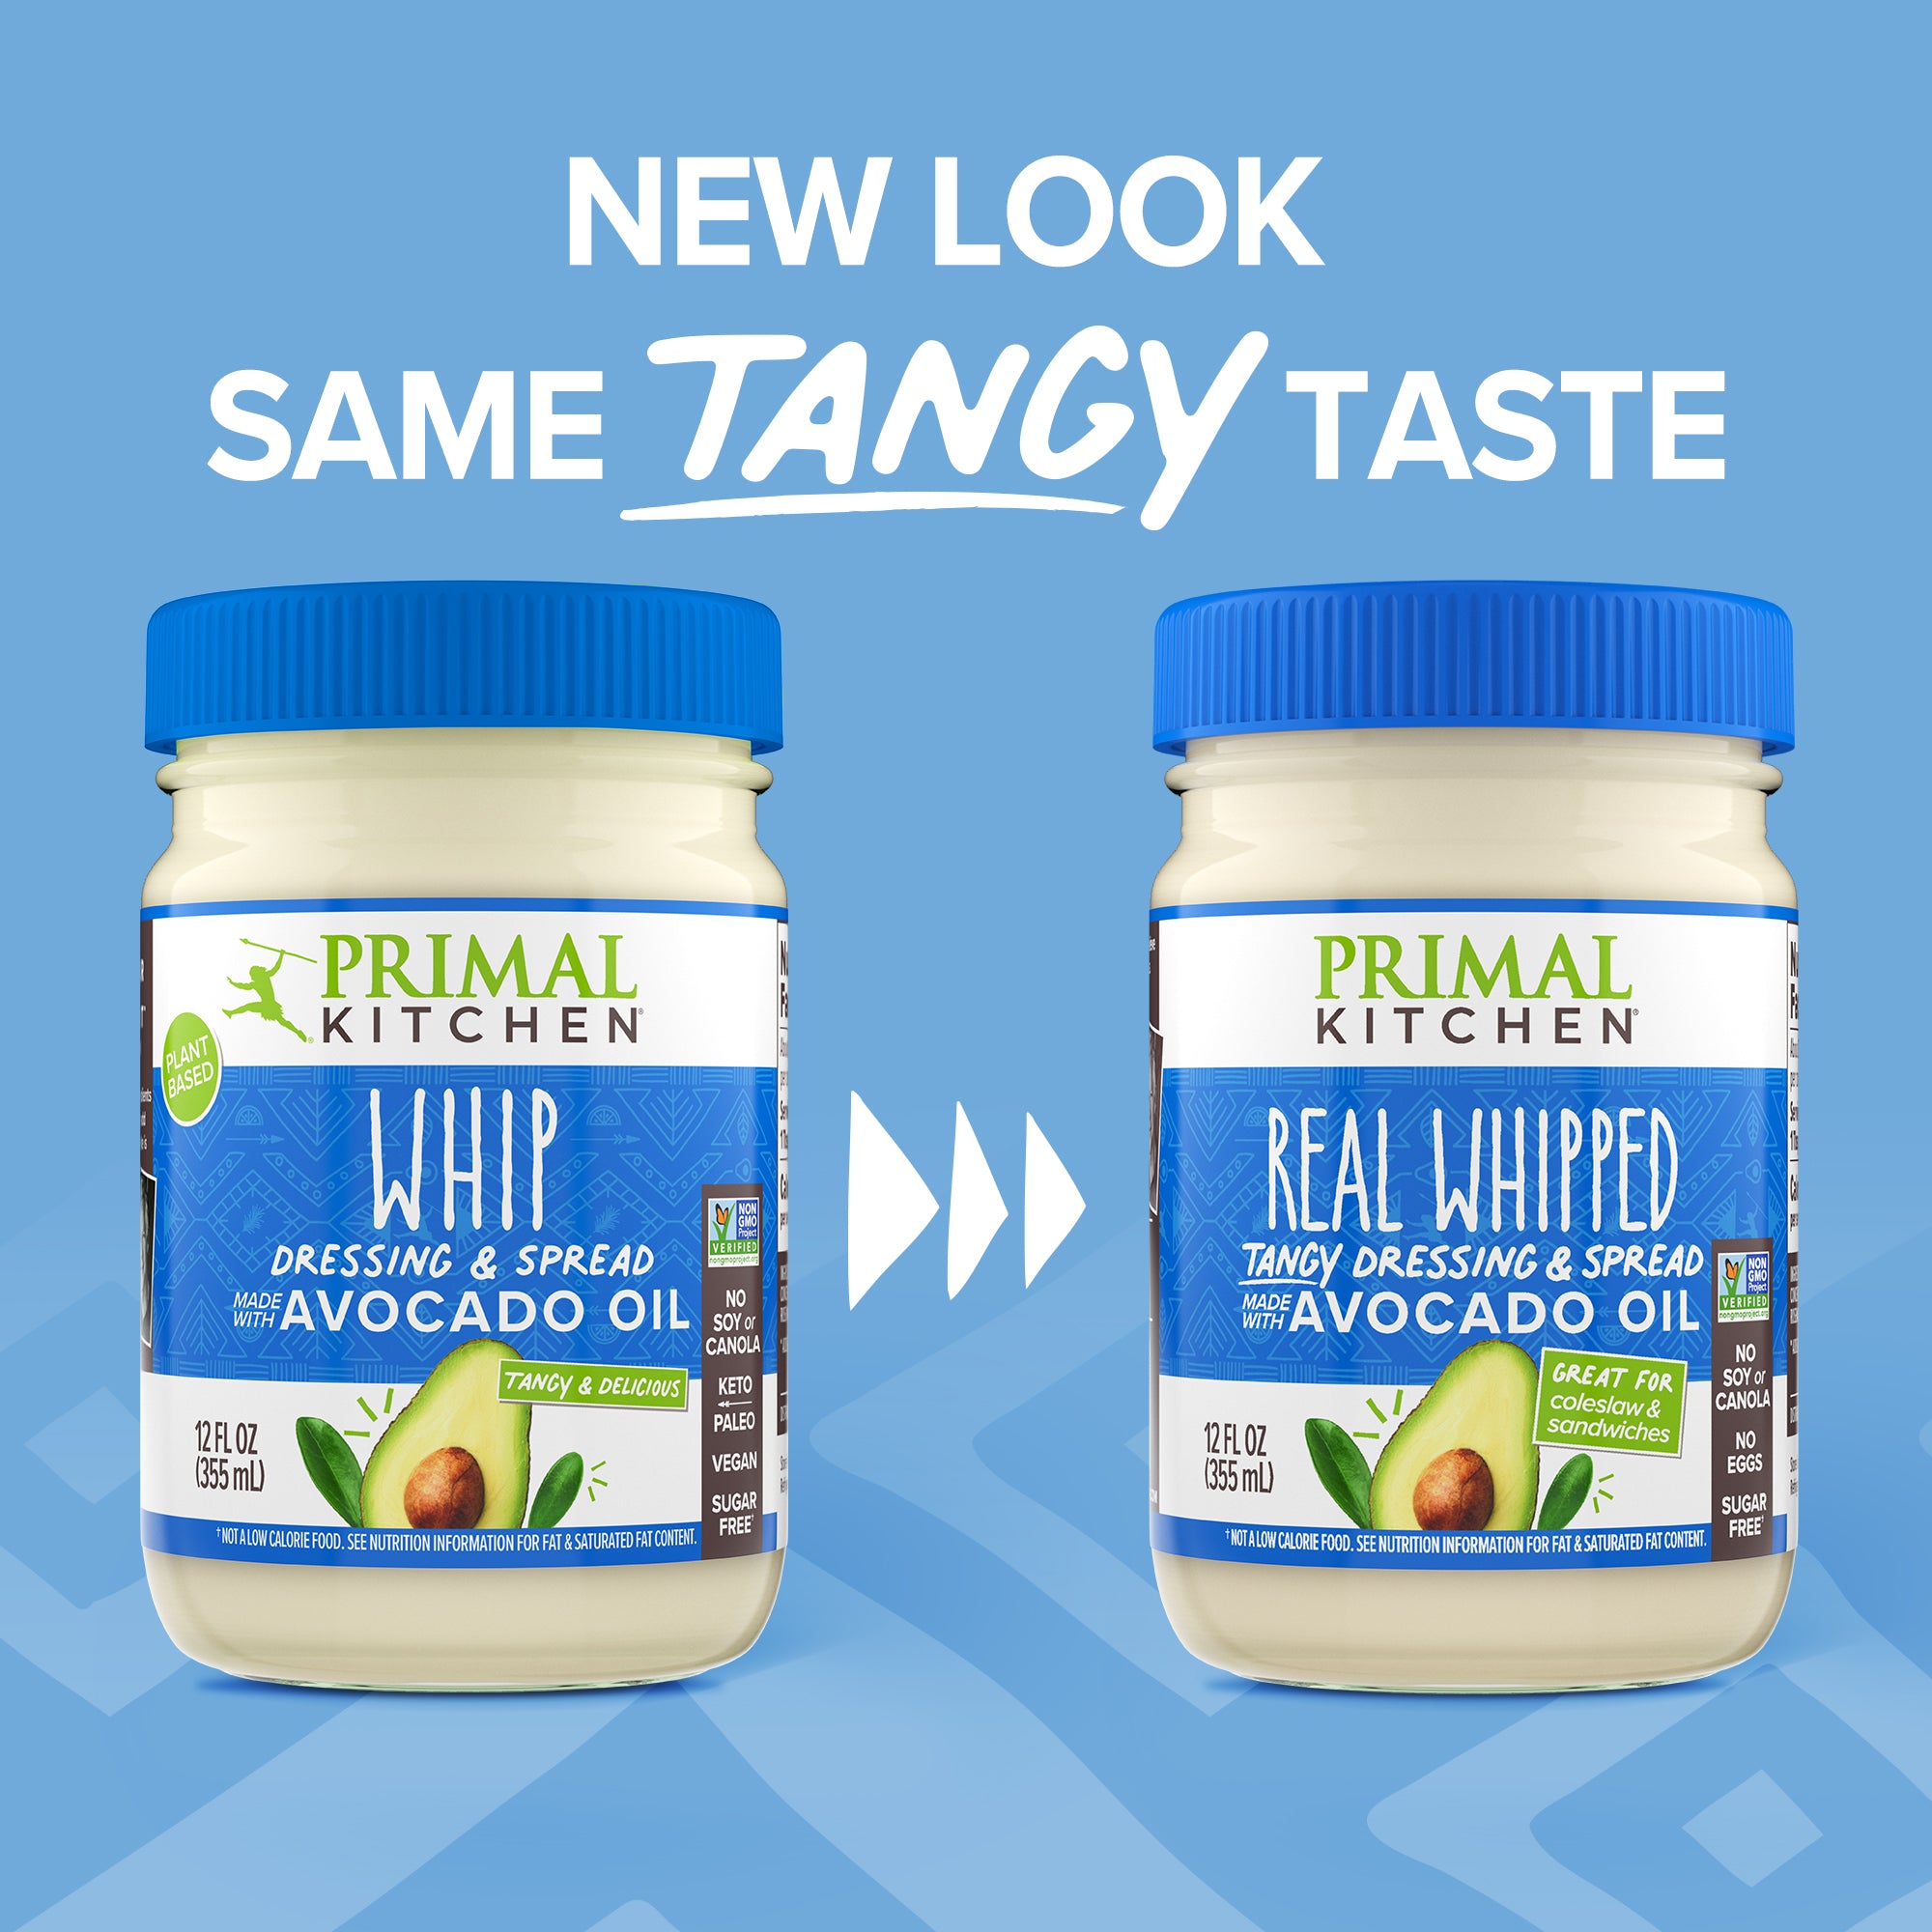 New look, same tangy taste next to a glass bottle of Primal Kitchen Whip with arrows pointing to a glass bottle of Primal Kitchen Real Whipped.